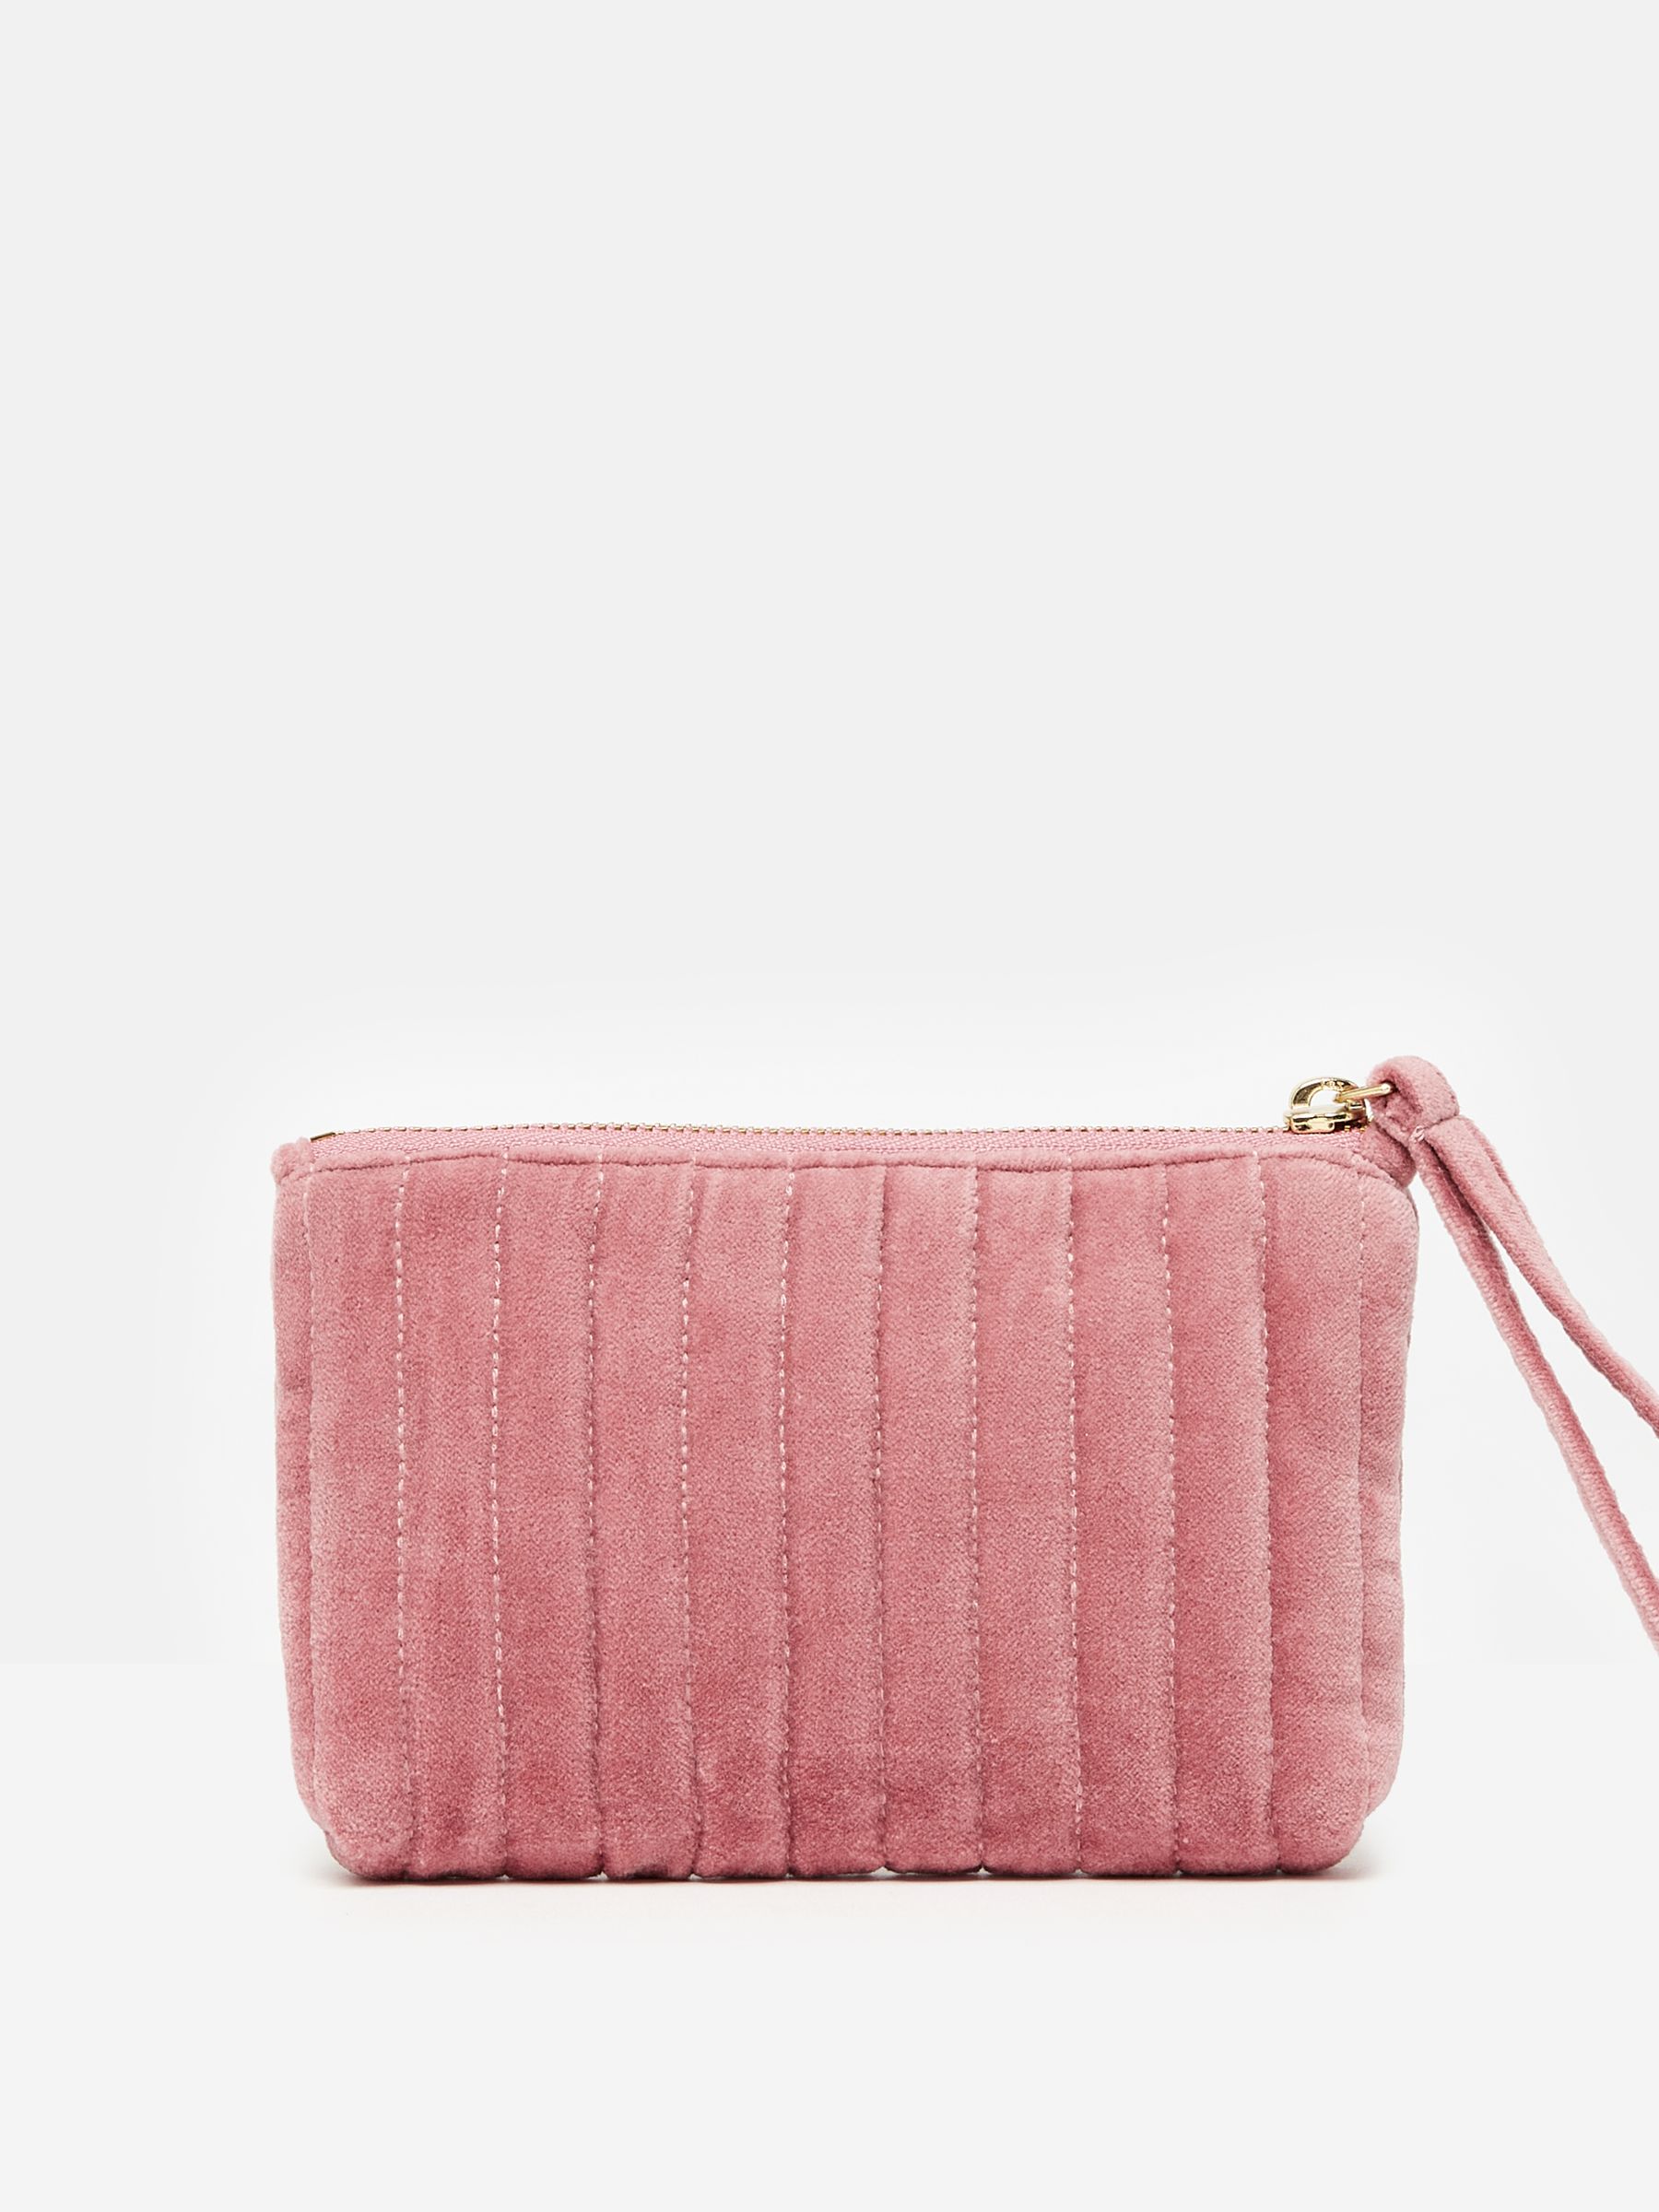 Buy Daphne Pink Velvet Wrist Purse from the Joules online shop